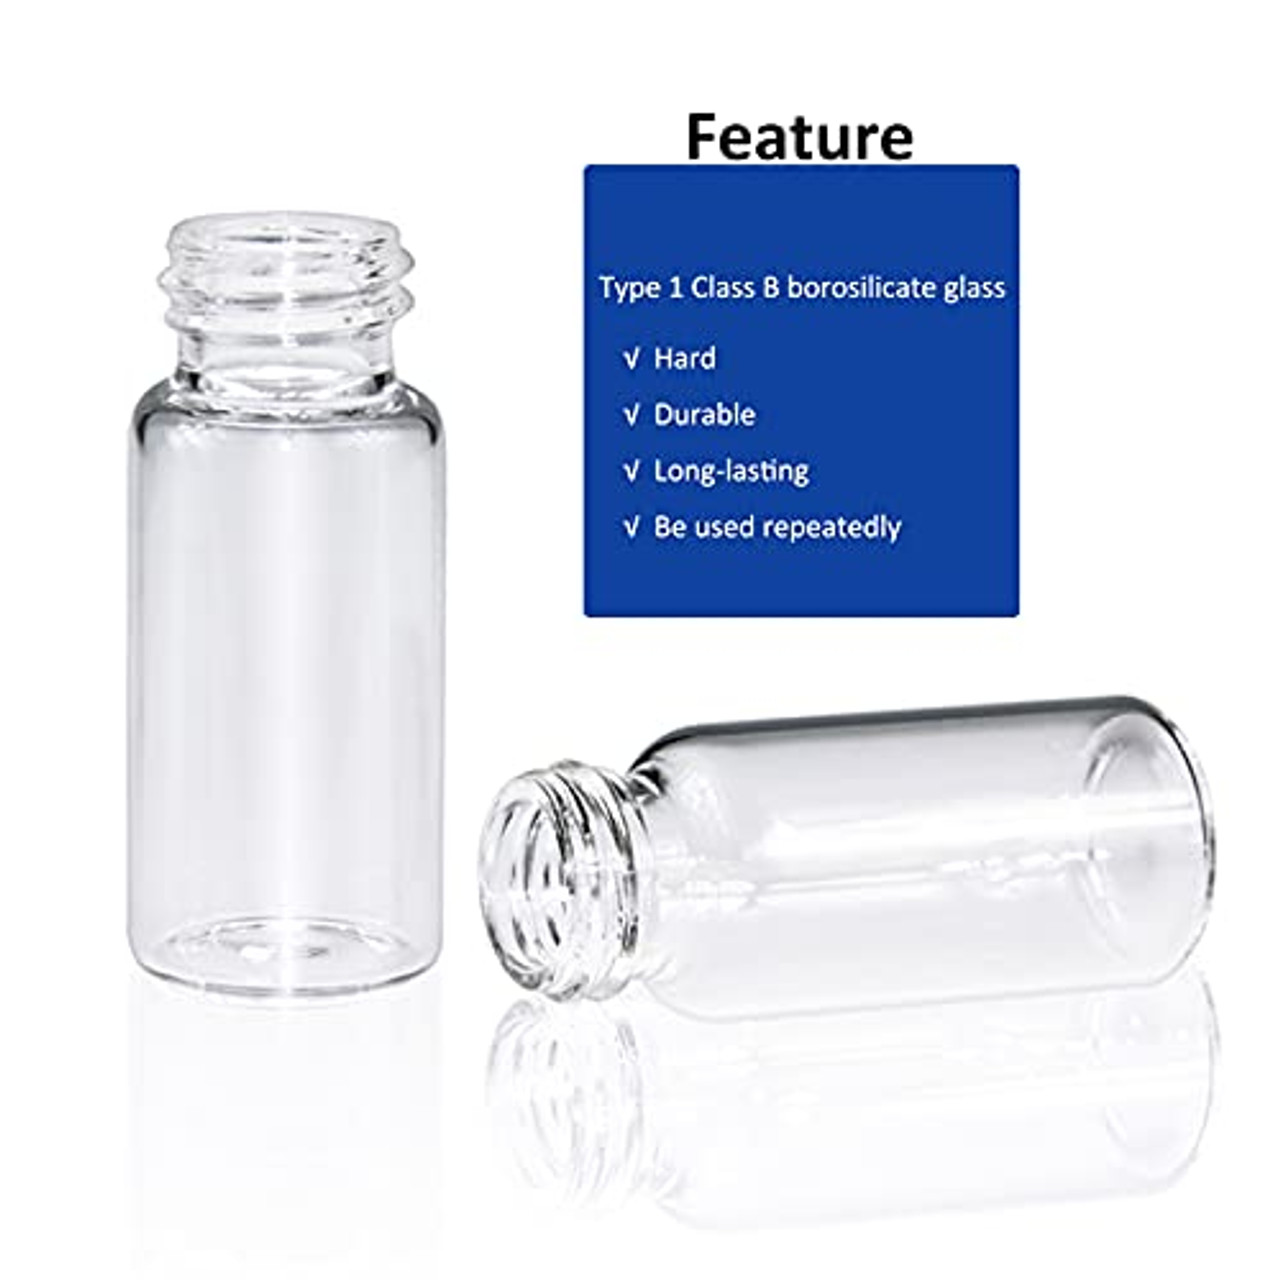 Create a glass bottle/jar/container with a threaded neck (screw